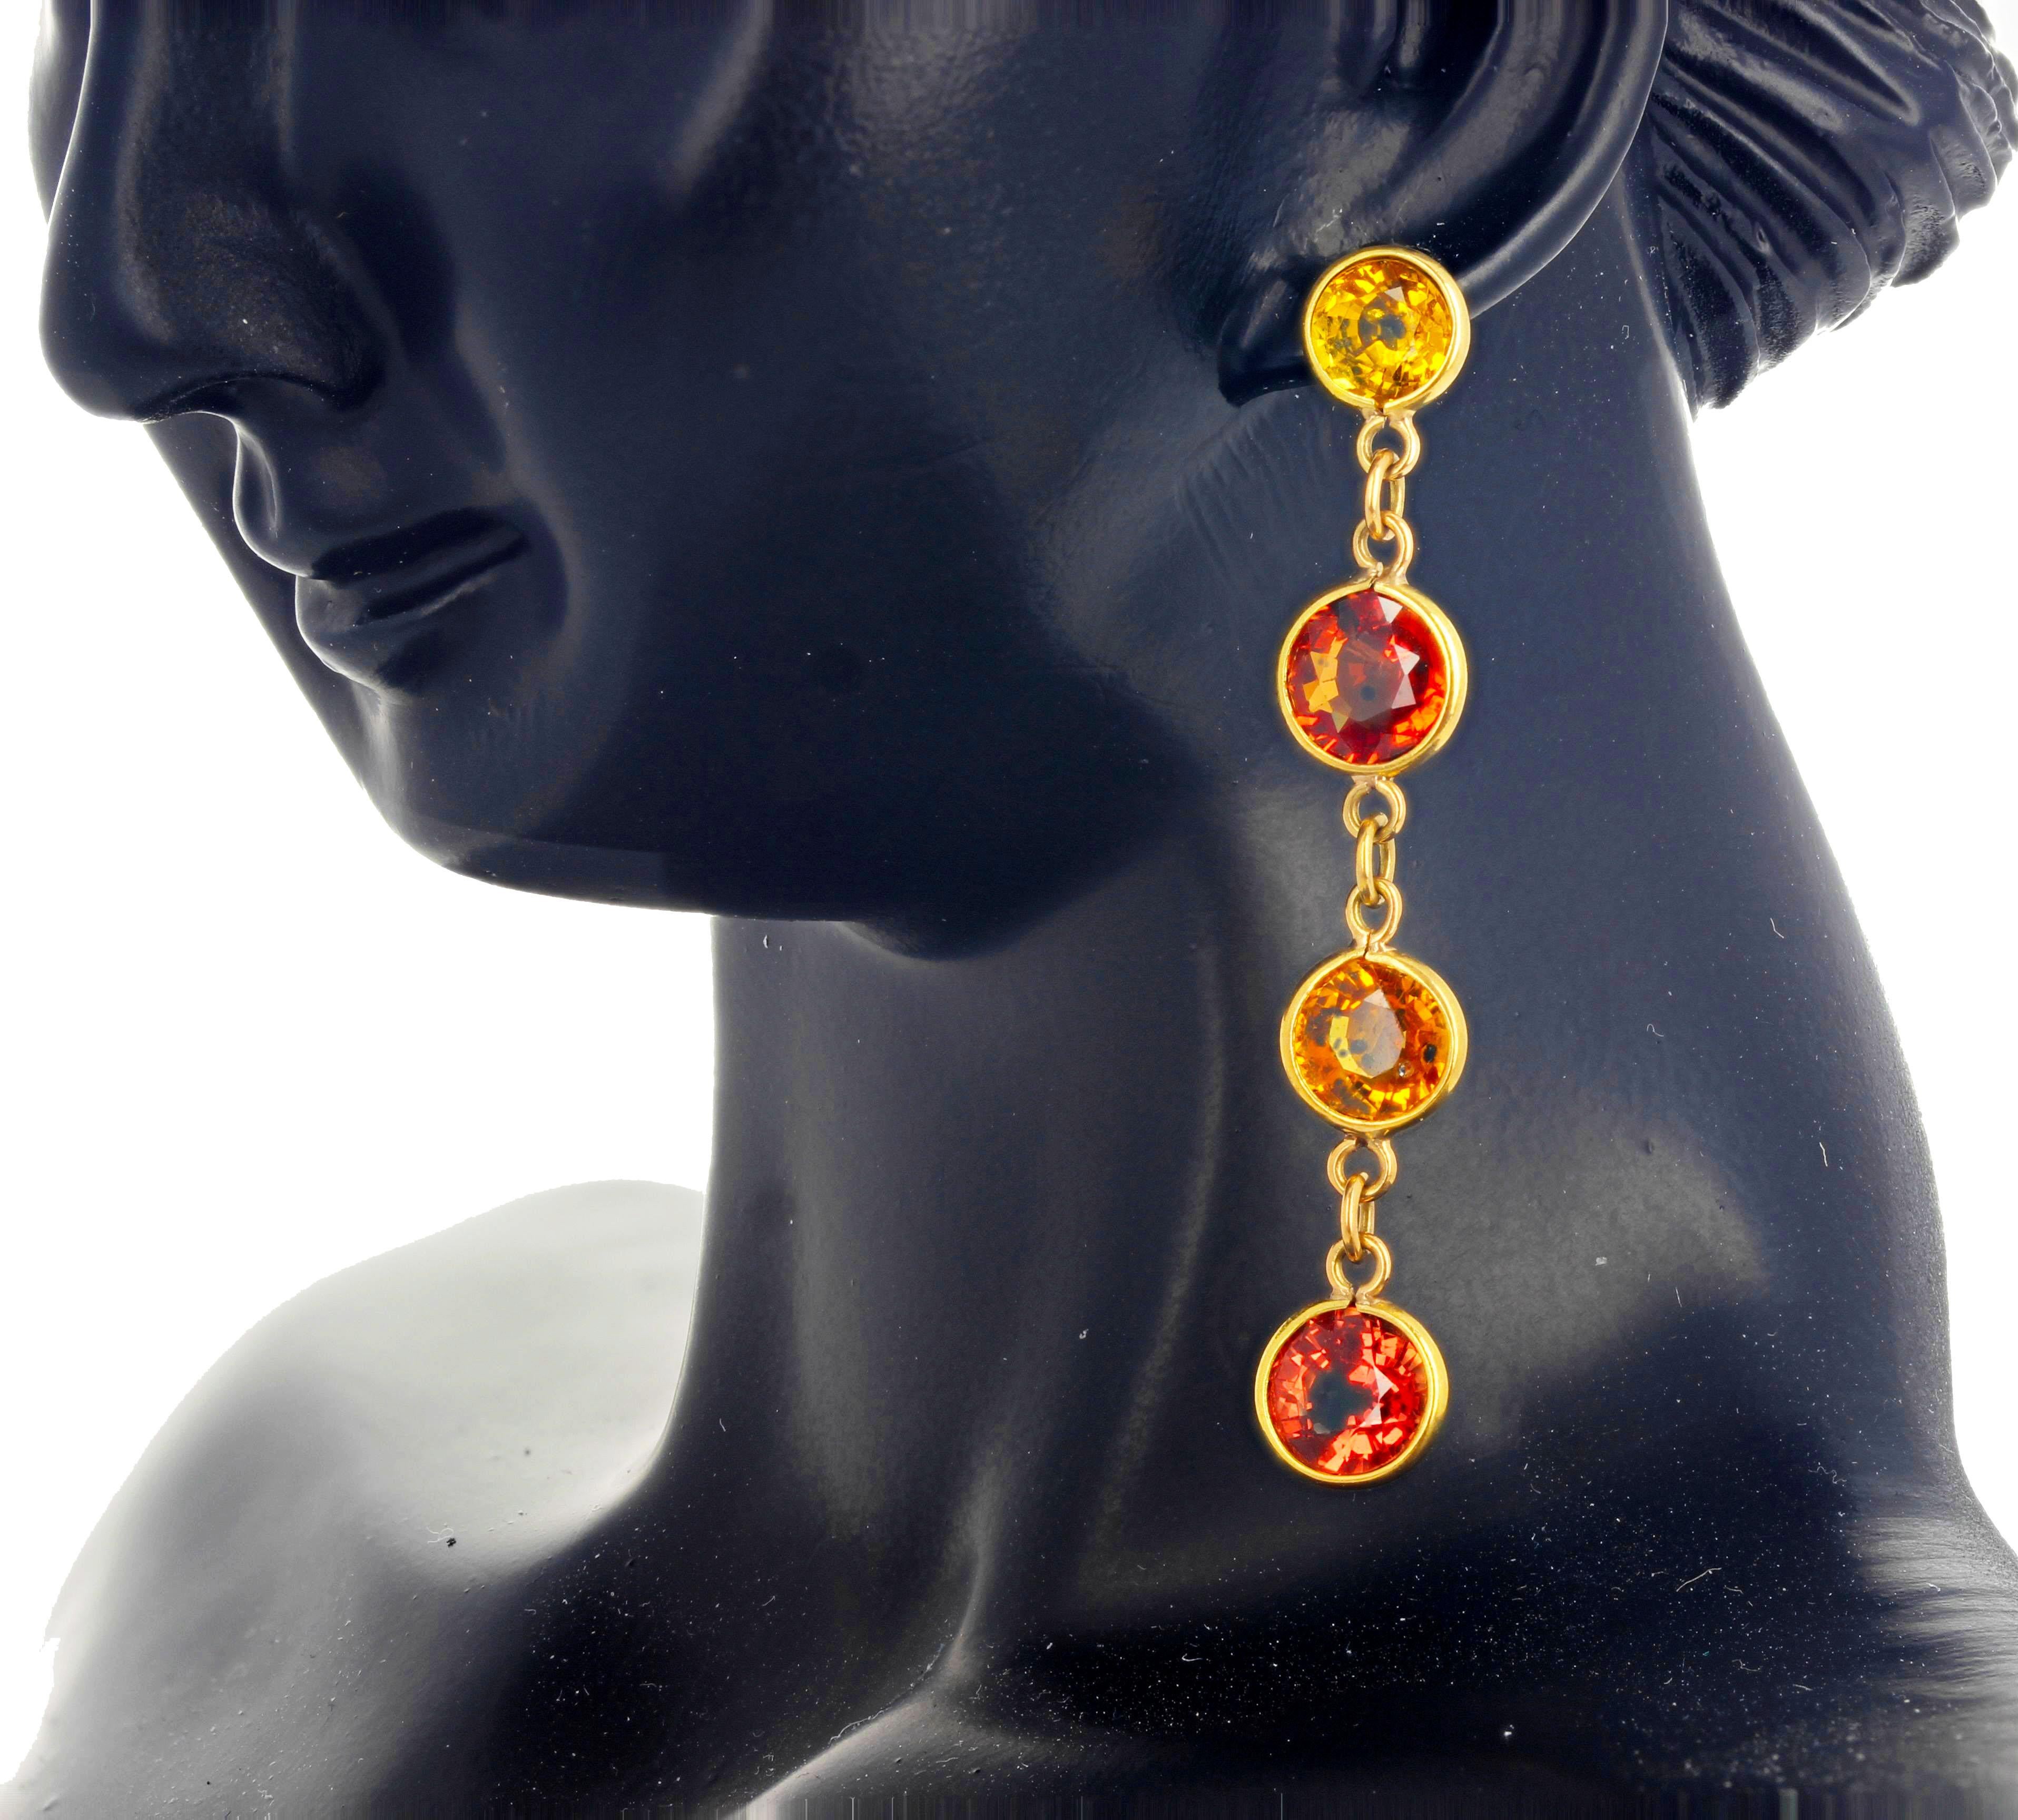 Brilliant natural rare type of Songea Sapphires set in 18Kt yellow gold dangle stud earrings.  They hang approximately 1 1/2 inches long and are approximately 1 carat each. (the gemstones are approximately 5 mm each).  Spectacular optical effect in